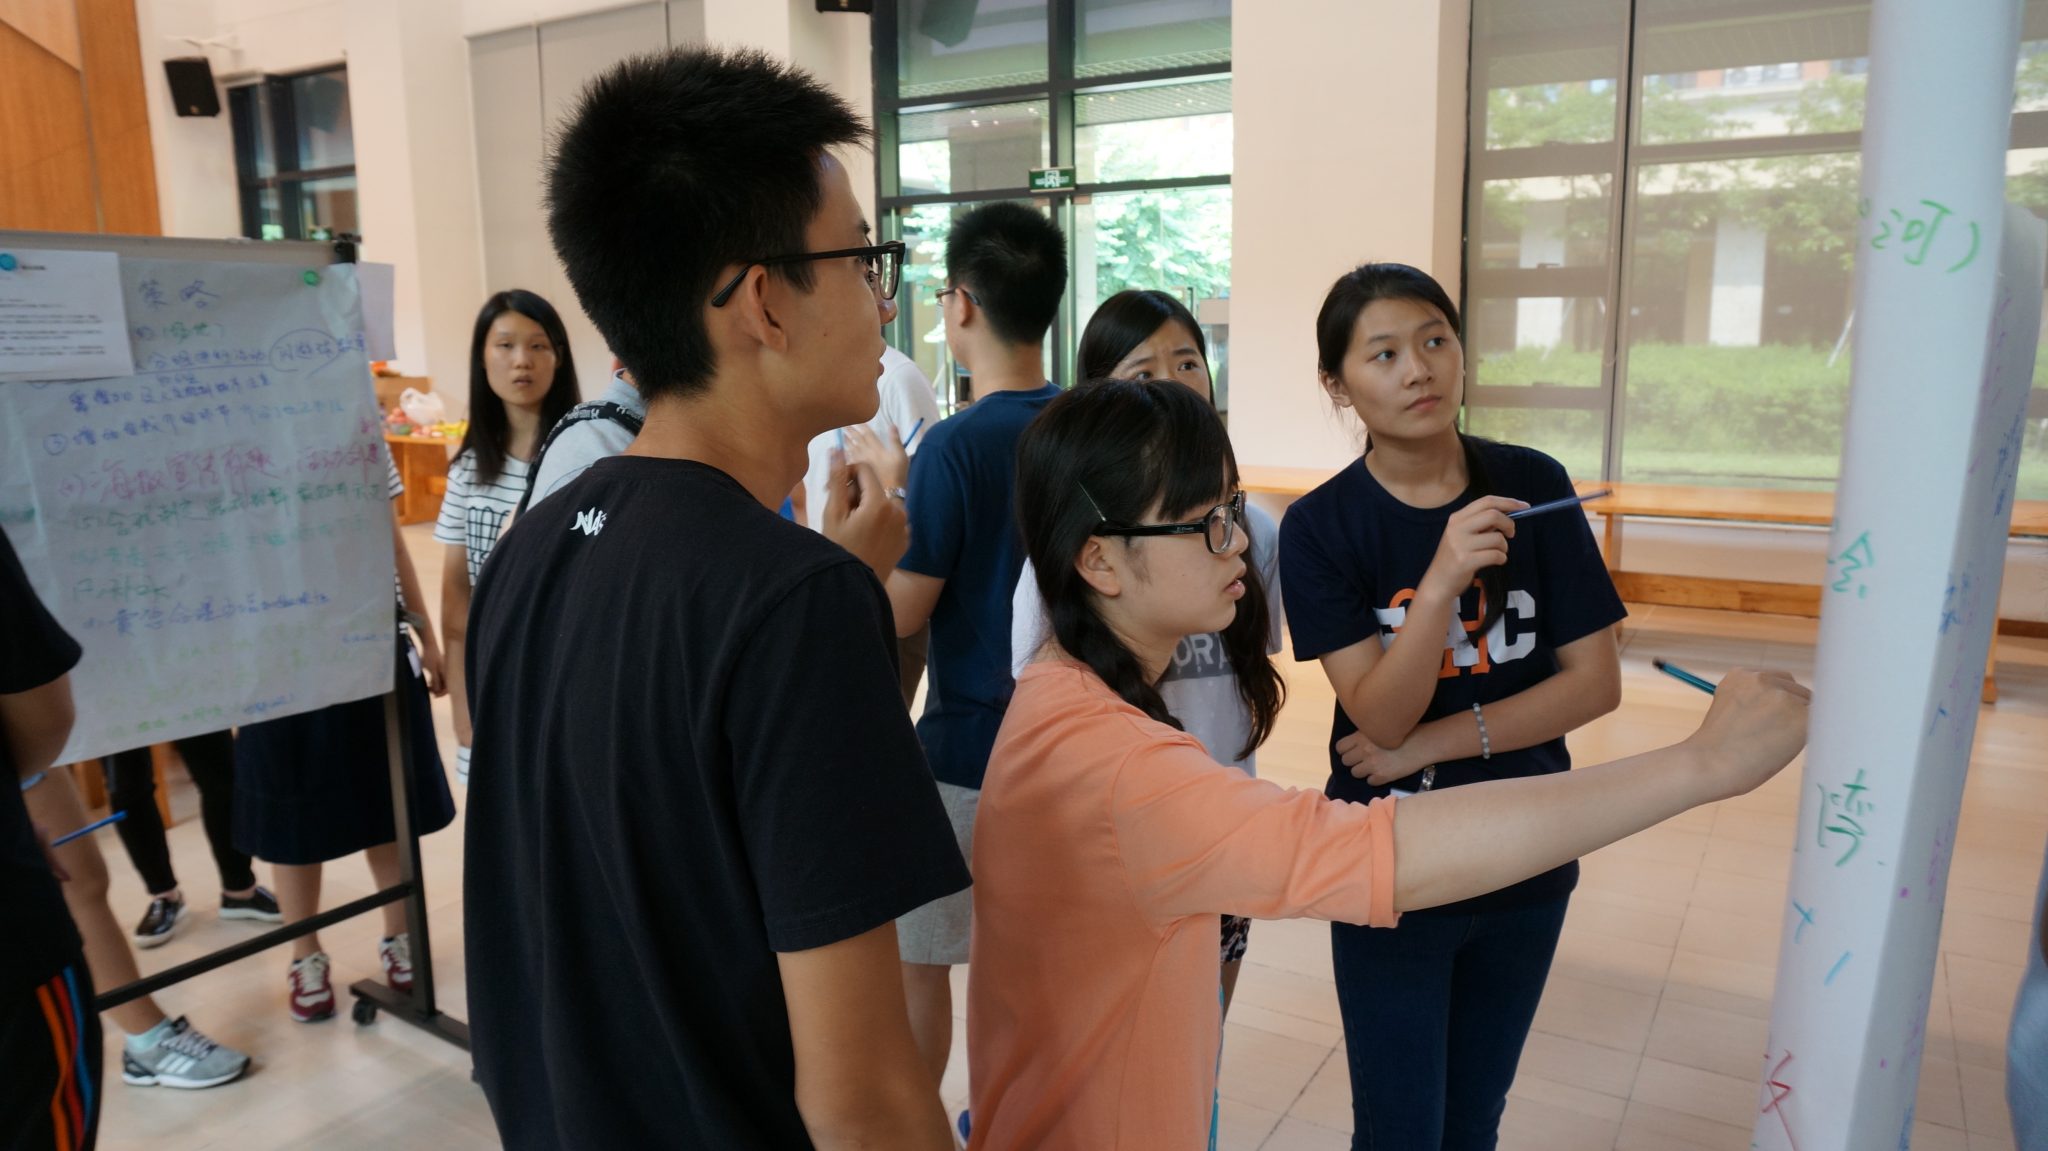 Student leaders sharing their comments and suggestions on various proposals of freshmen activities. 學生領袖分享他們對於各個為新生所設計的迎新活動的意見和建議。